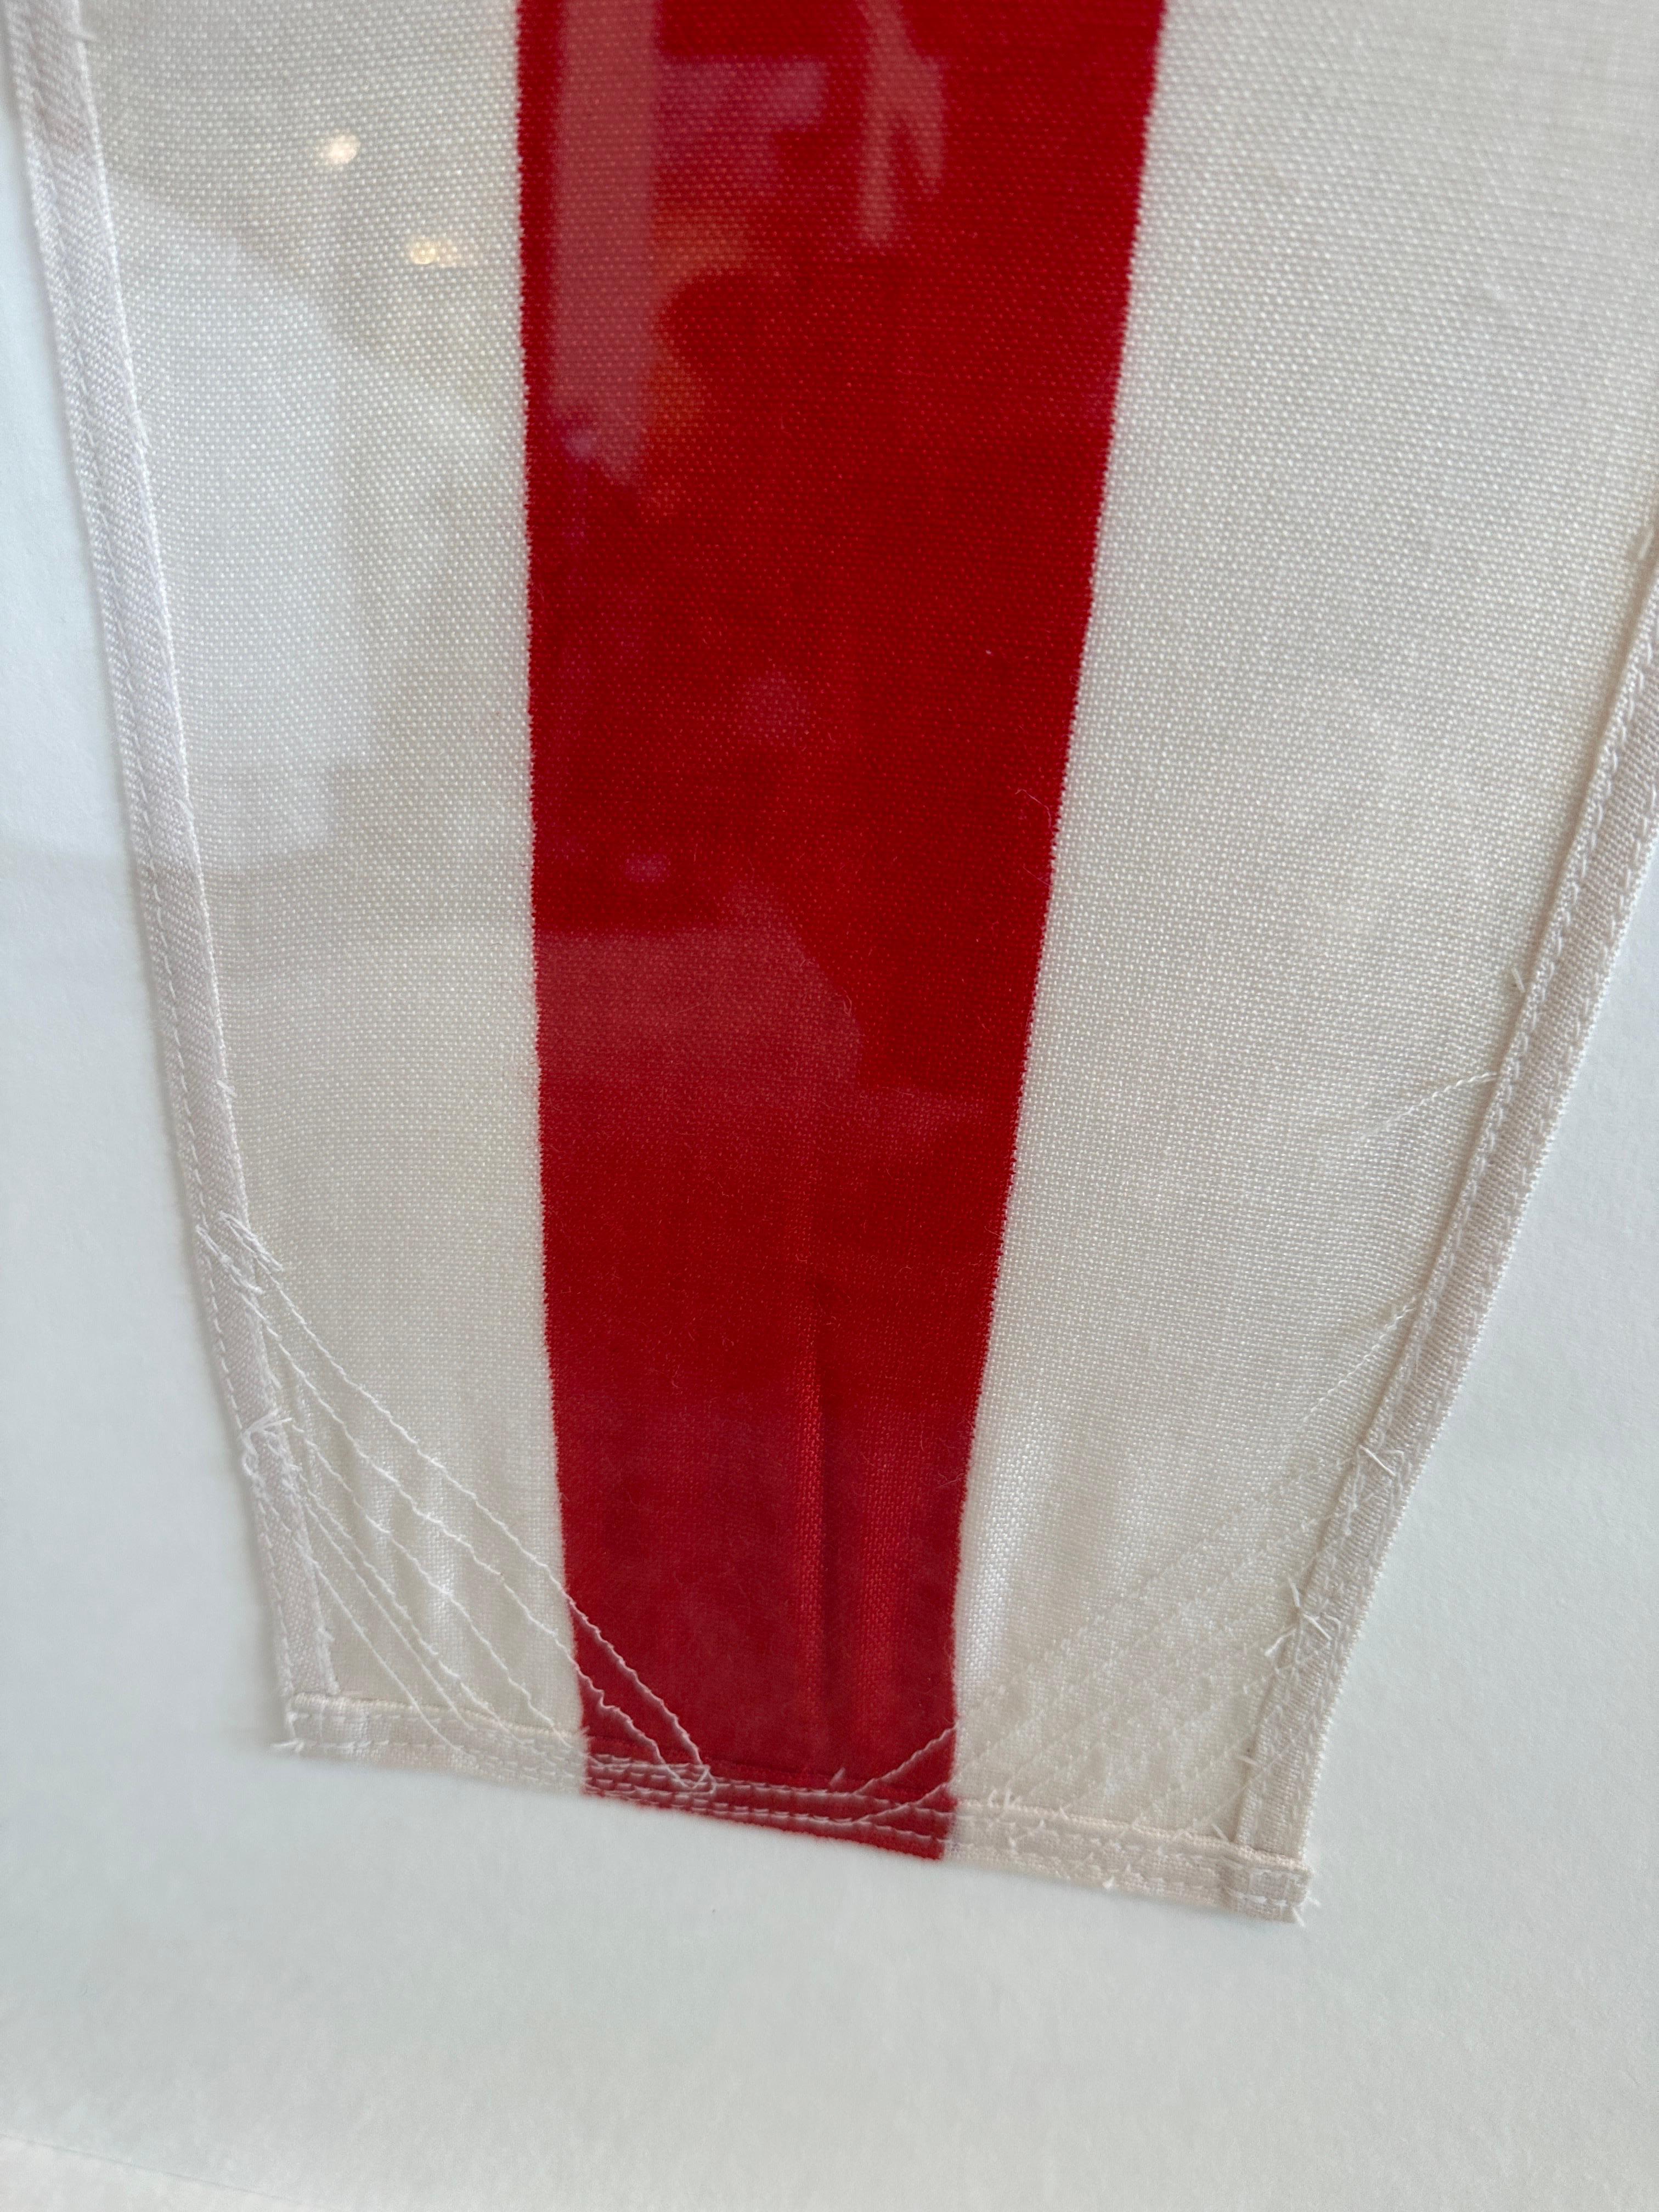 Mid-20th Century Authentic Nautical Signal Flag from 1940's Framed Professionally